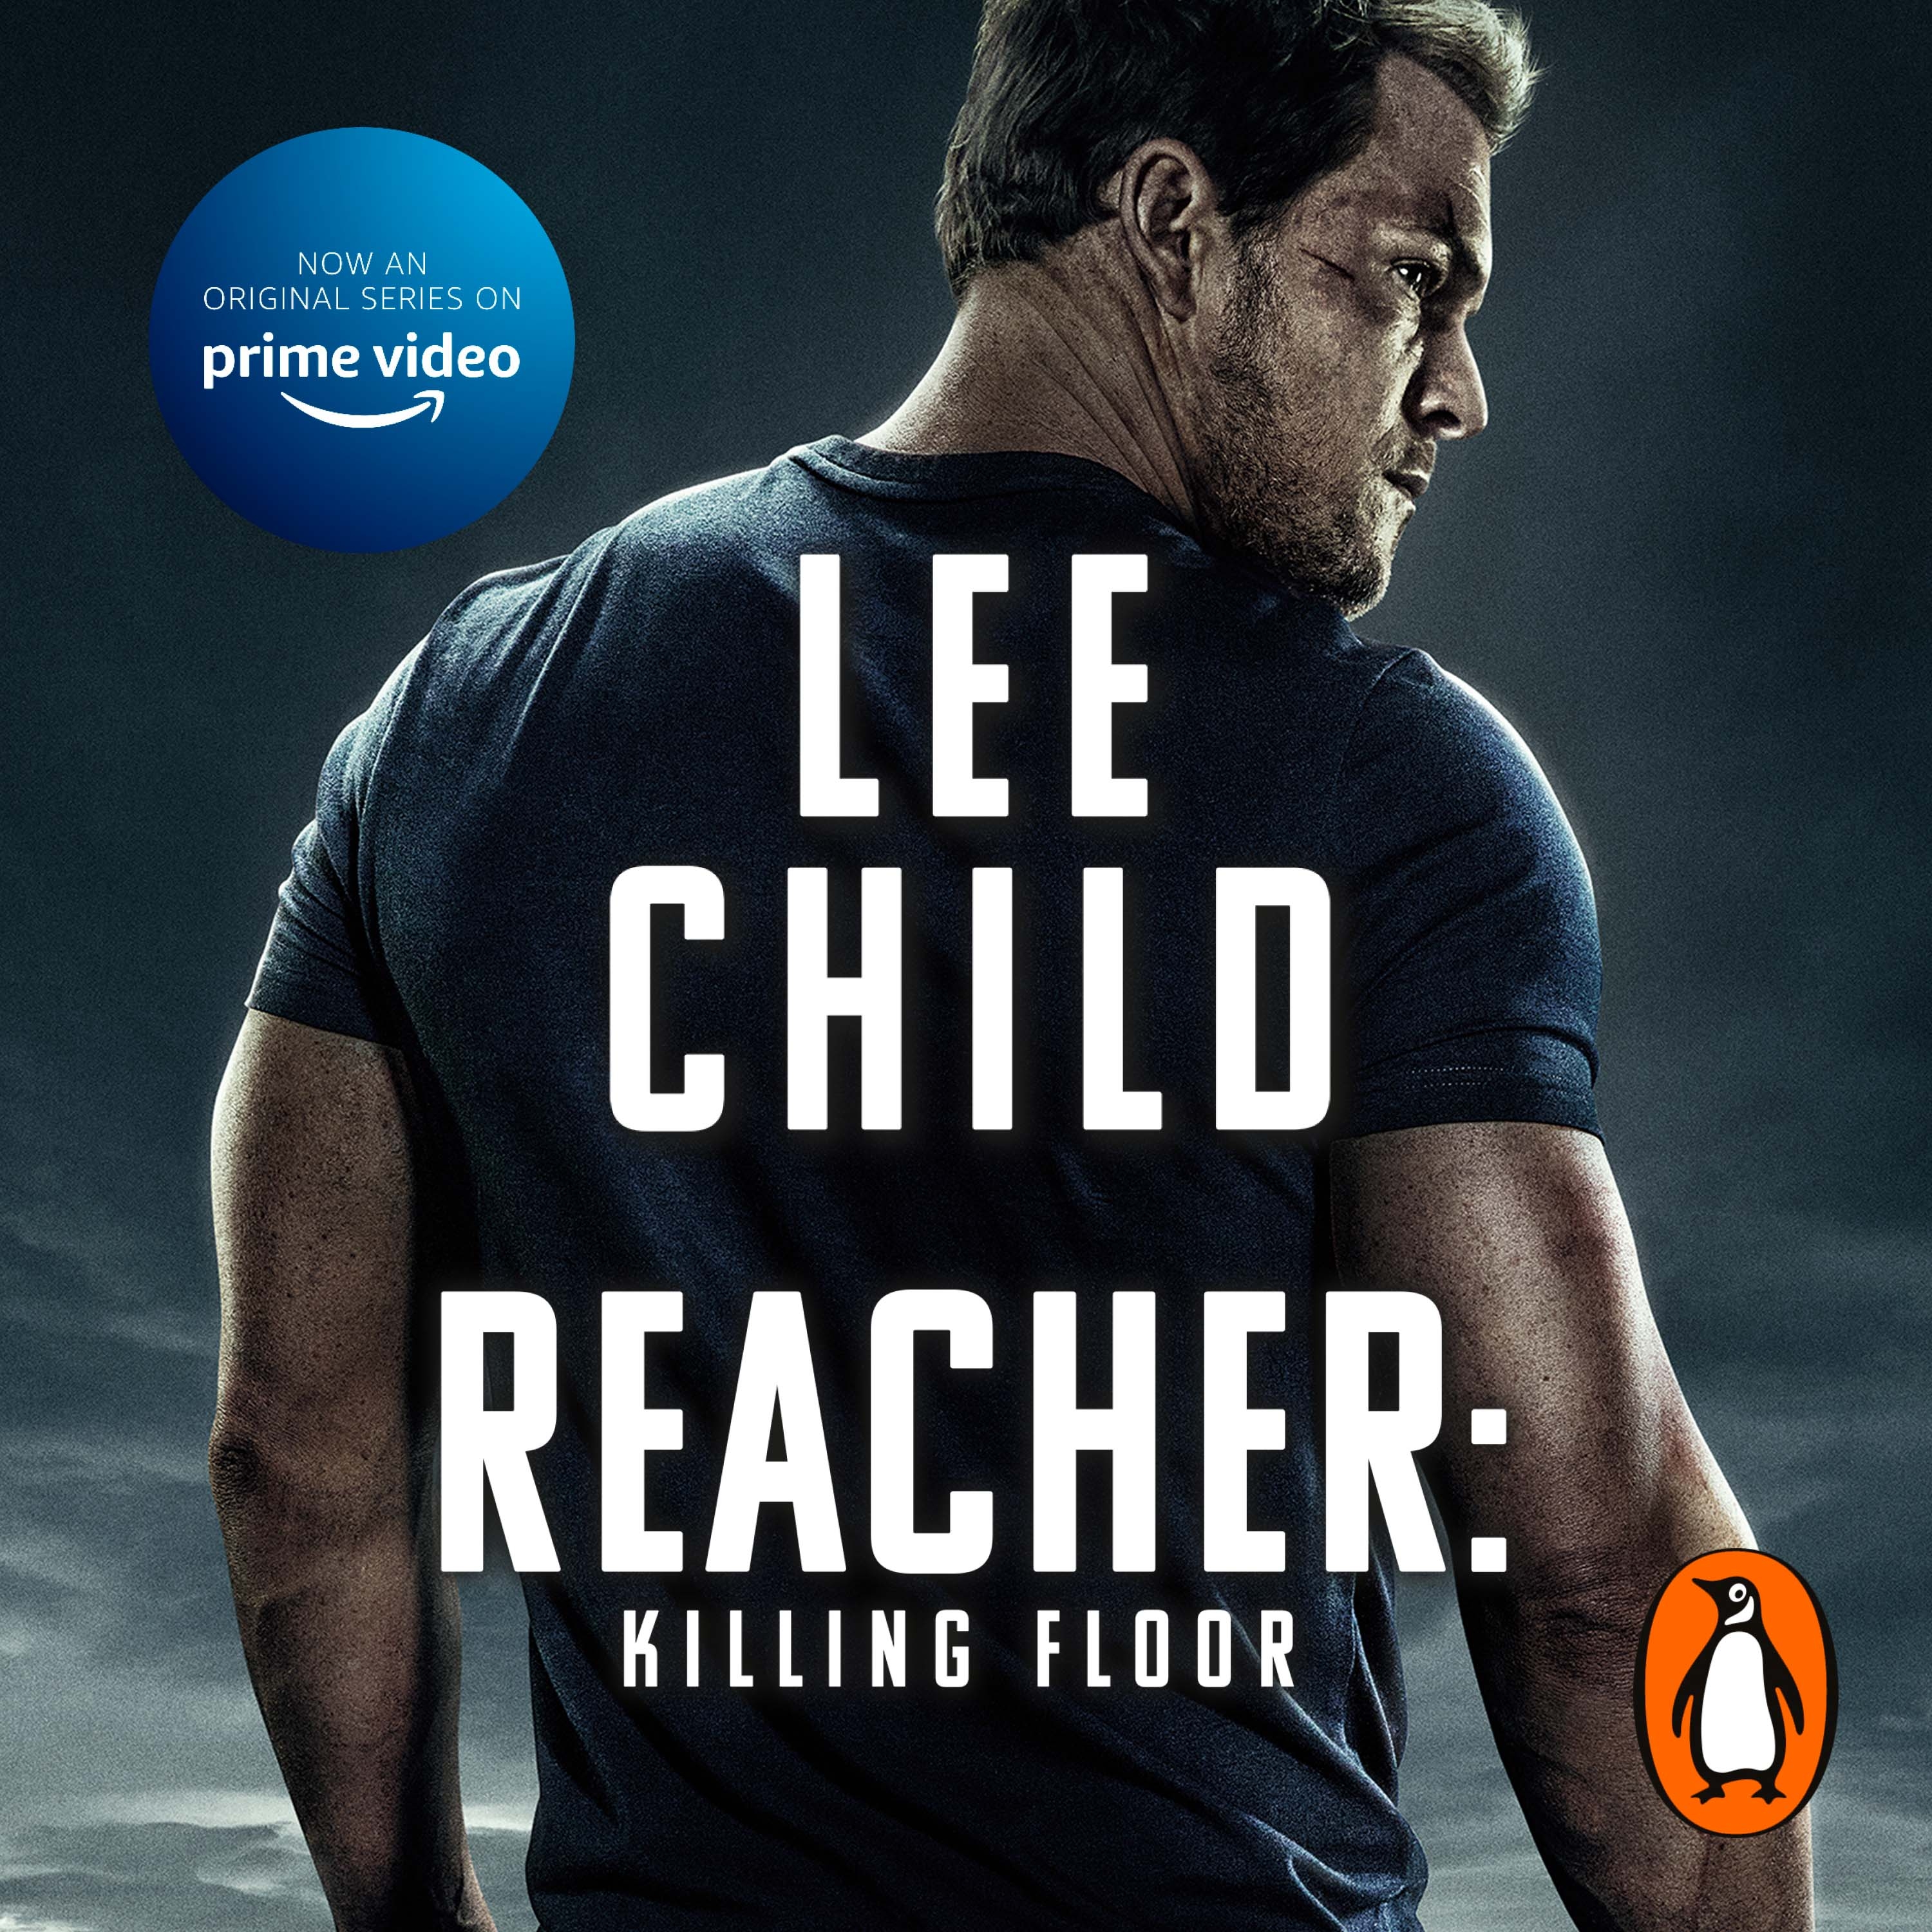 Cover of Lee Child's audiobook "Reacher: Killing Floor". A picture of Jack Reacher looking over his shoulders, with a cloudy background. The author name and title in large white text across the centre.